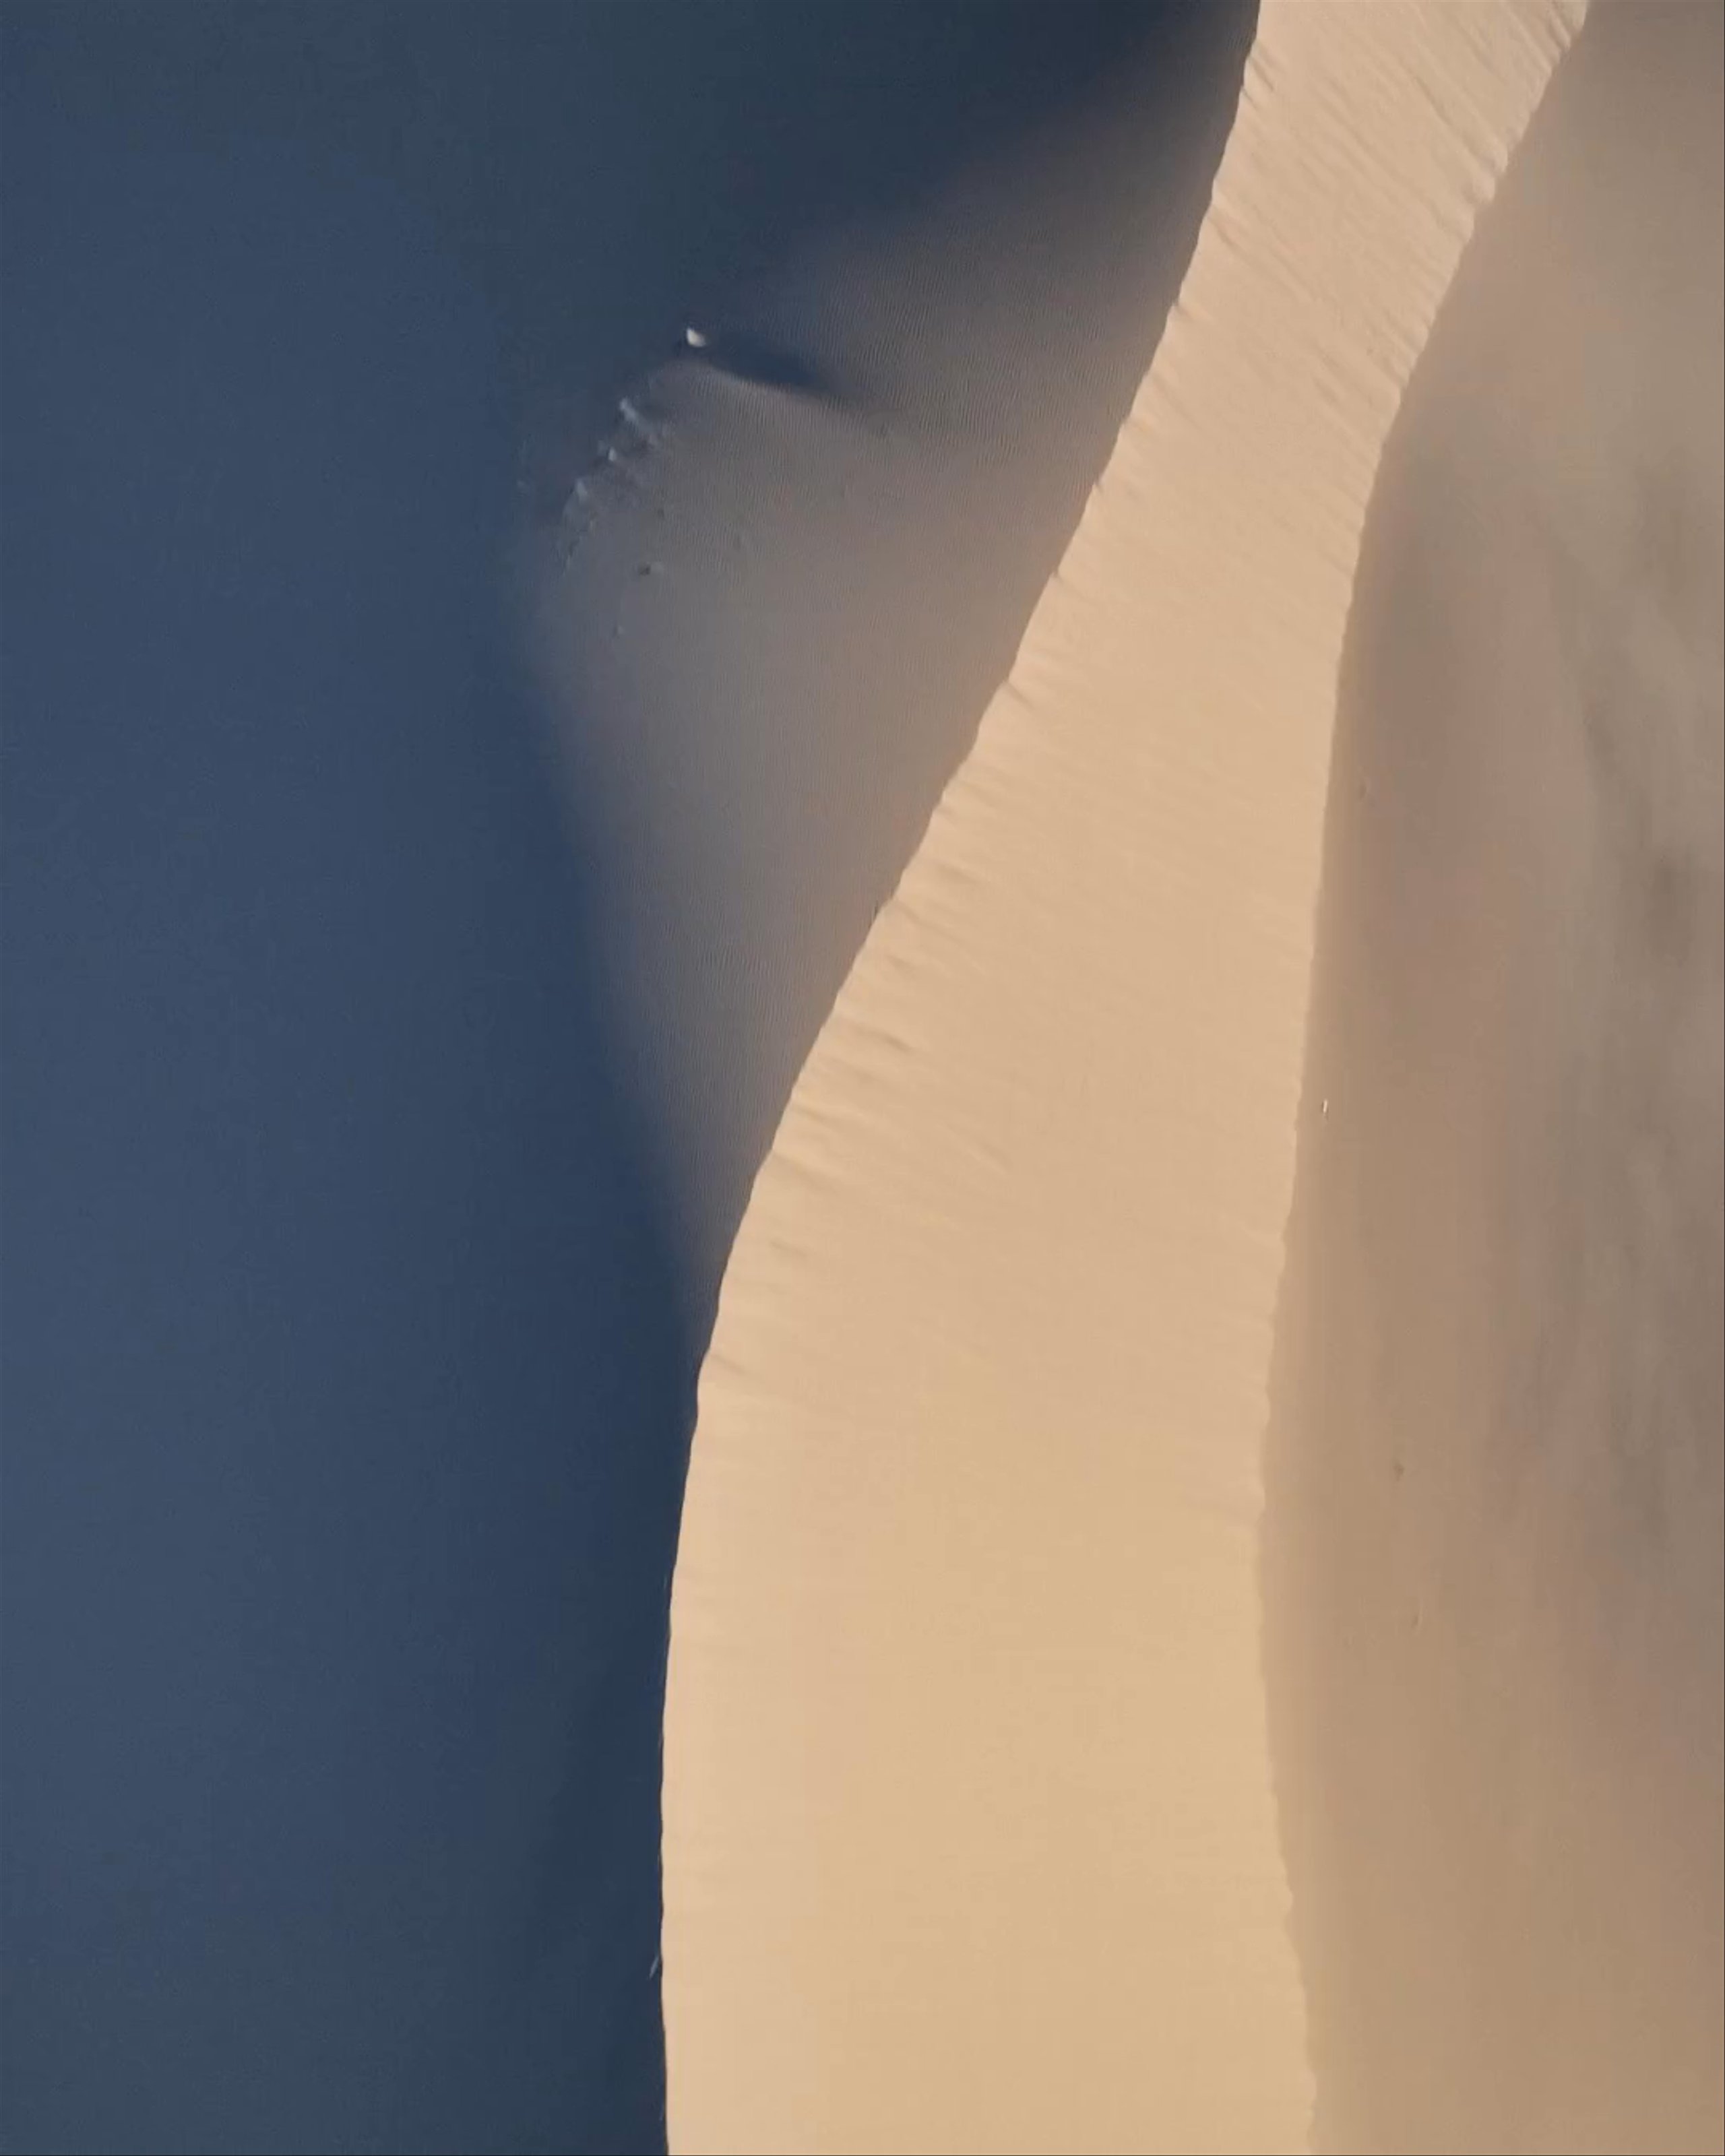 Drone video of sand dunes showing light and shadowed areas